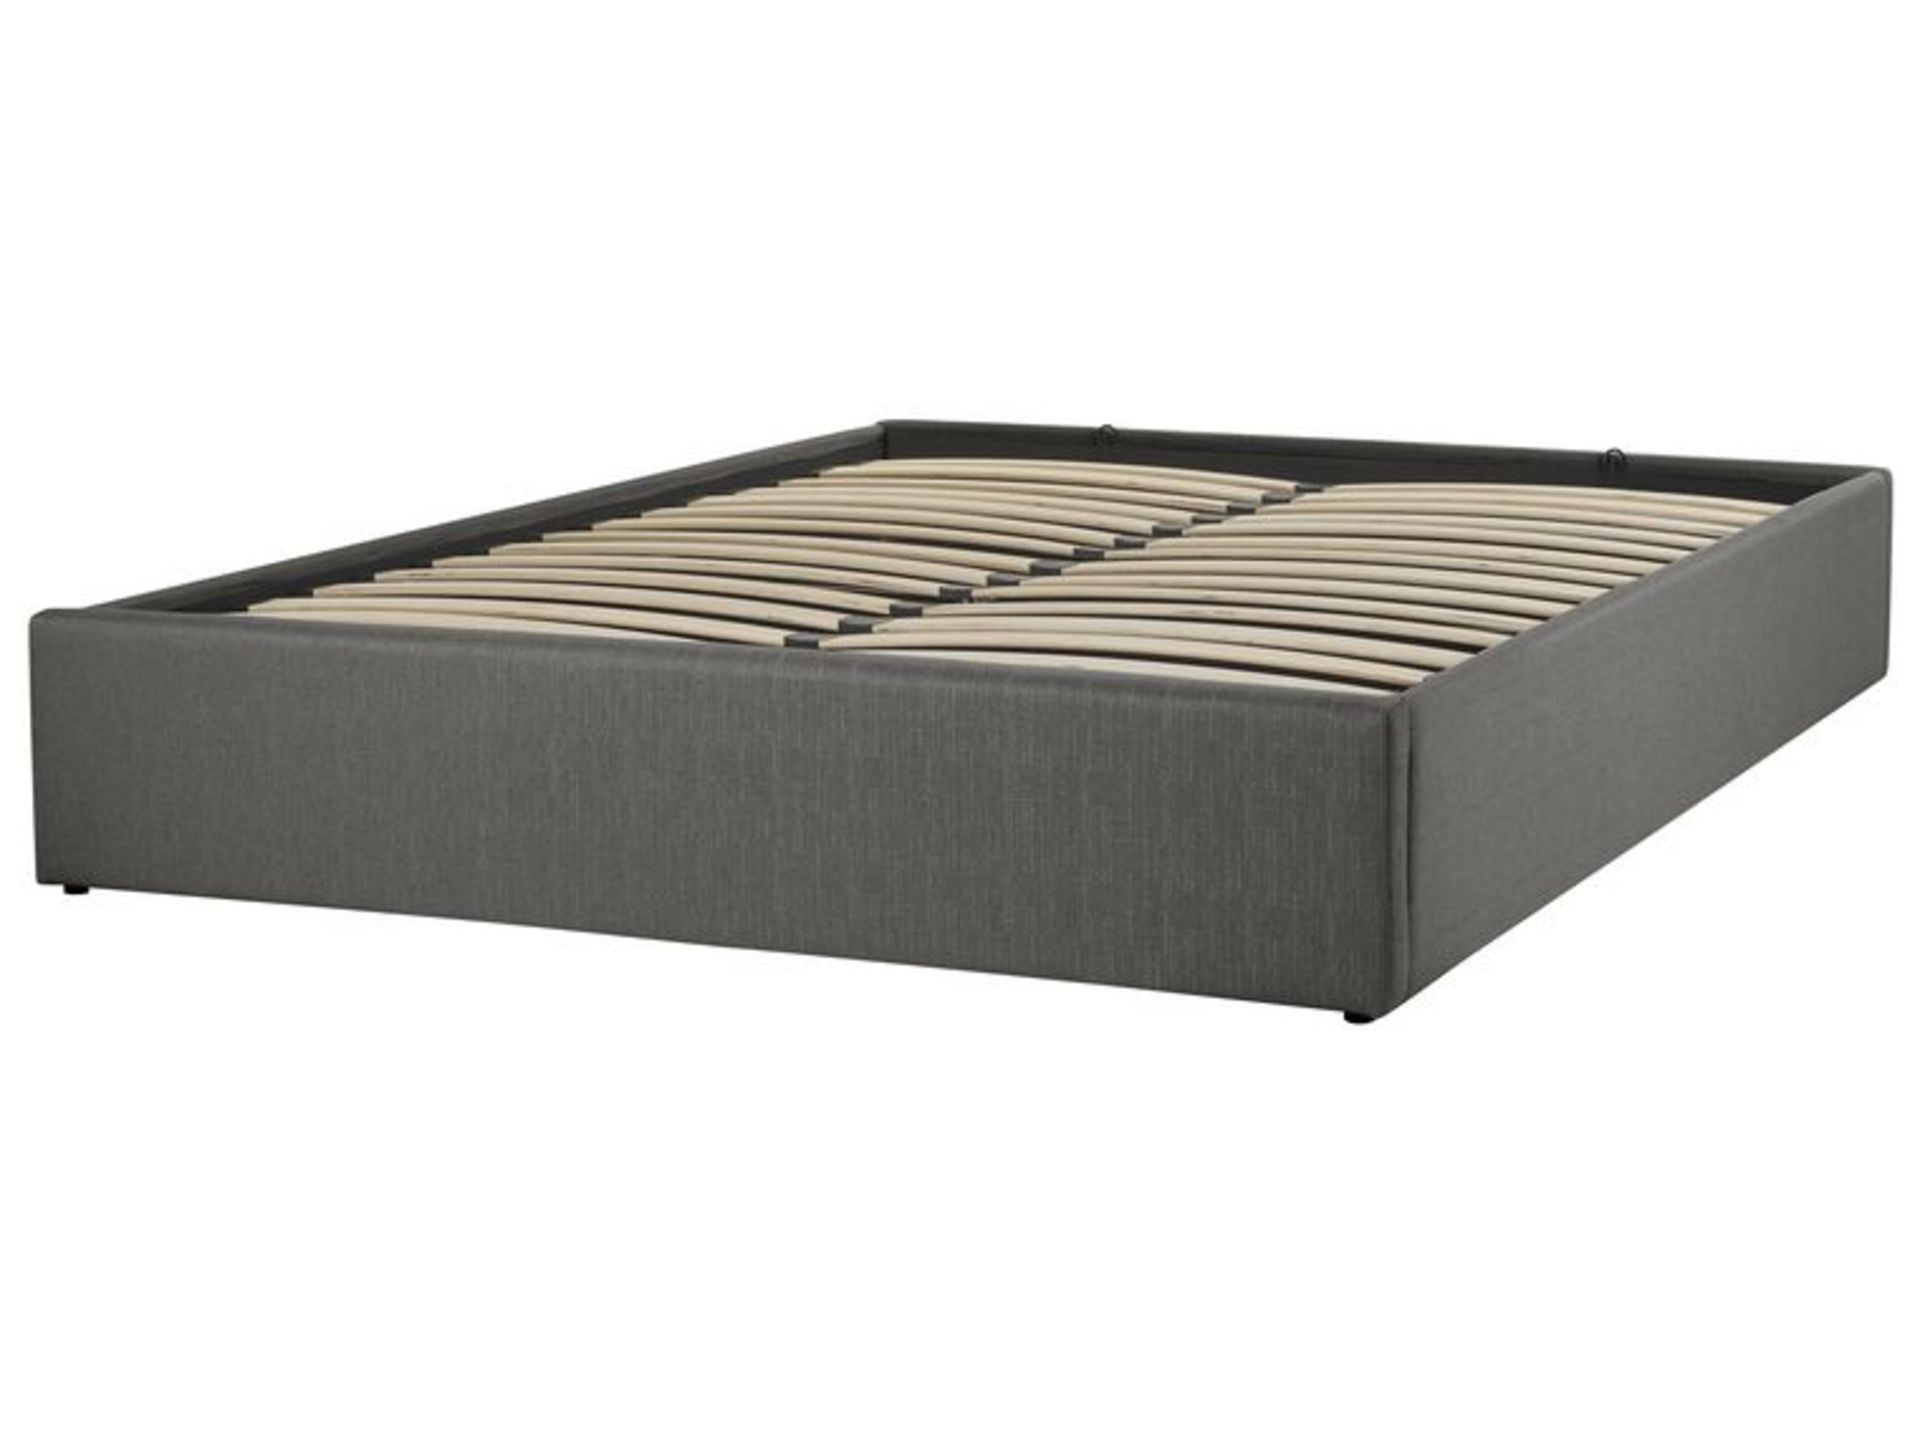 Dinan Fabric EU King Size Ottoman Bed Grey.- SR6. RRP £429.99. Add a stylish vibe to your bedroom